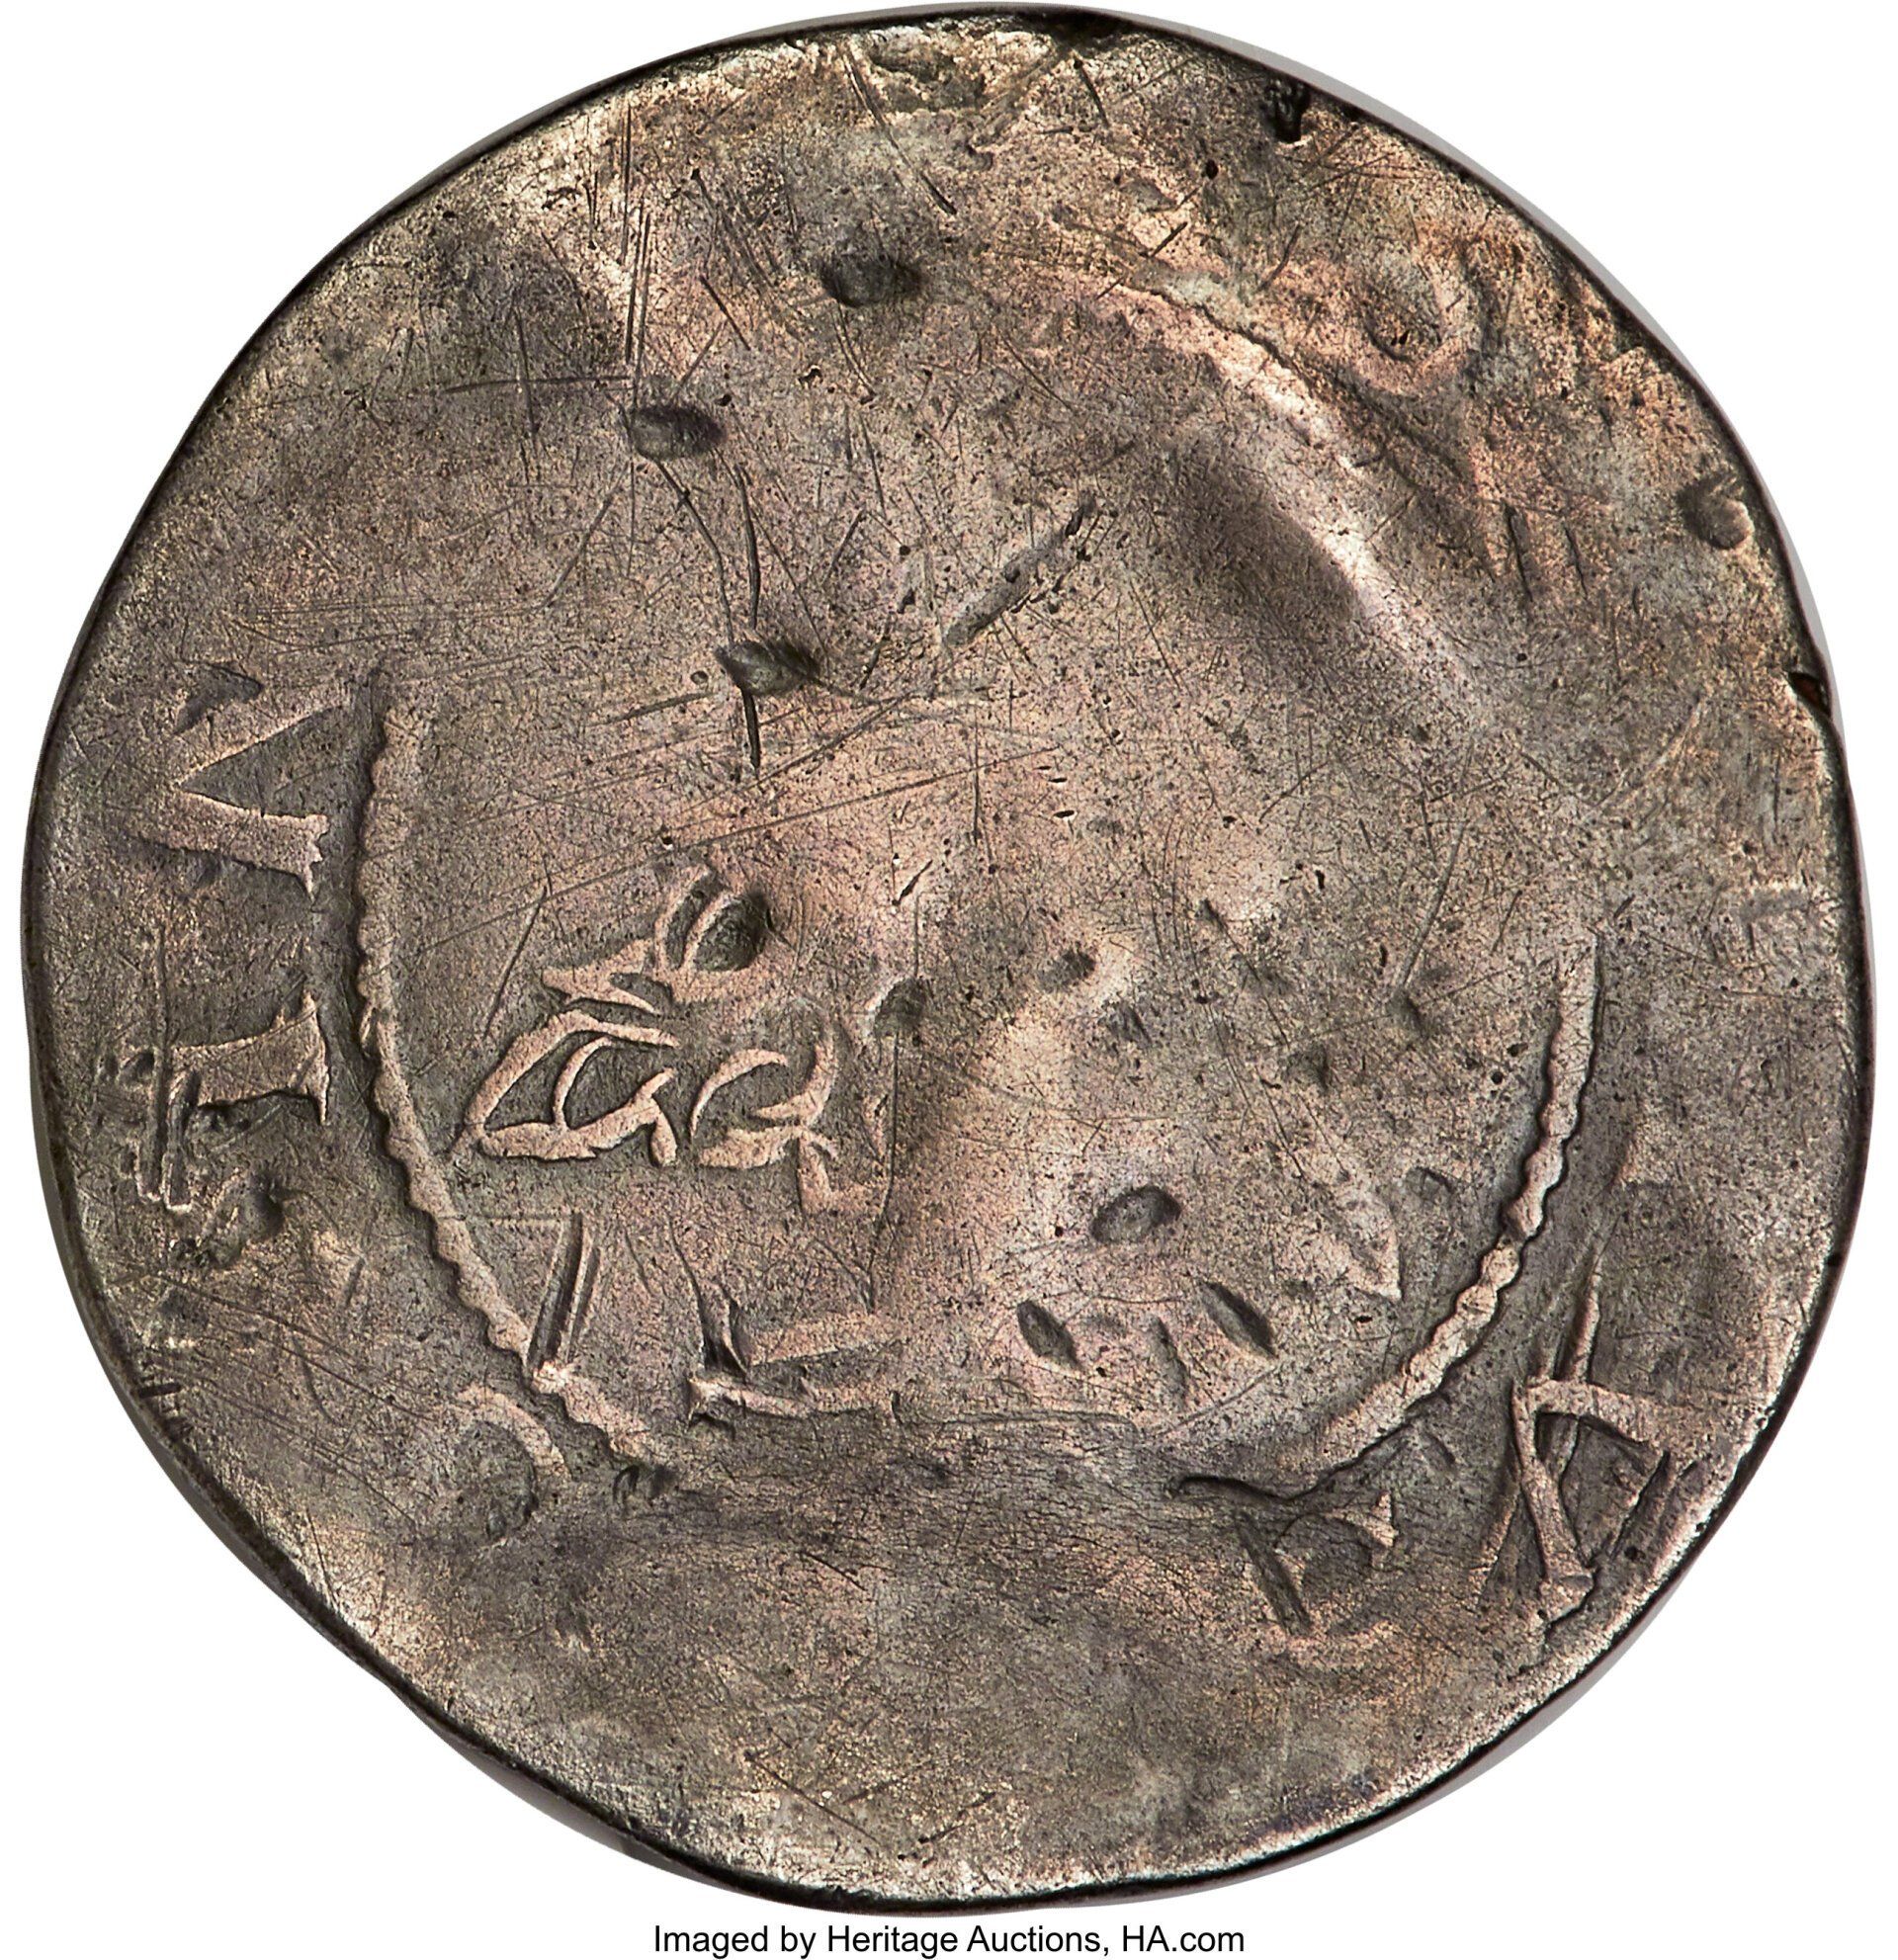 1652 Willow Tree Shilling Offered by Heritage Auctions, HA.com